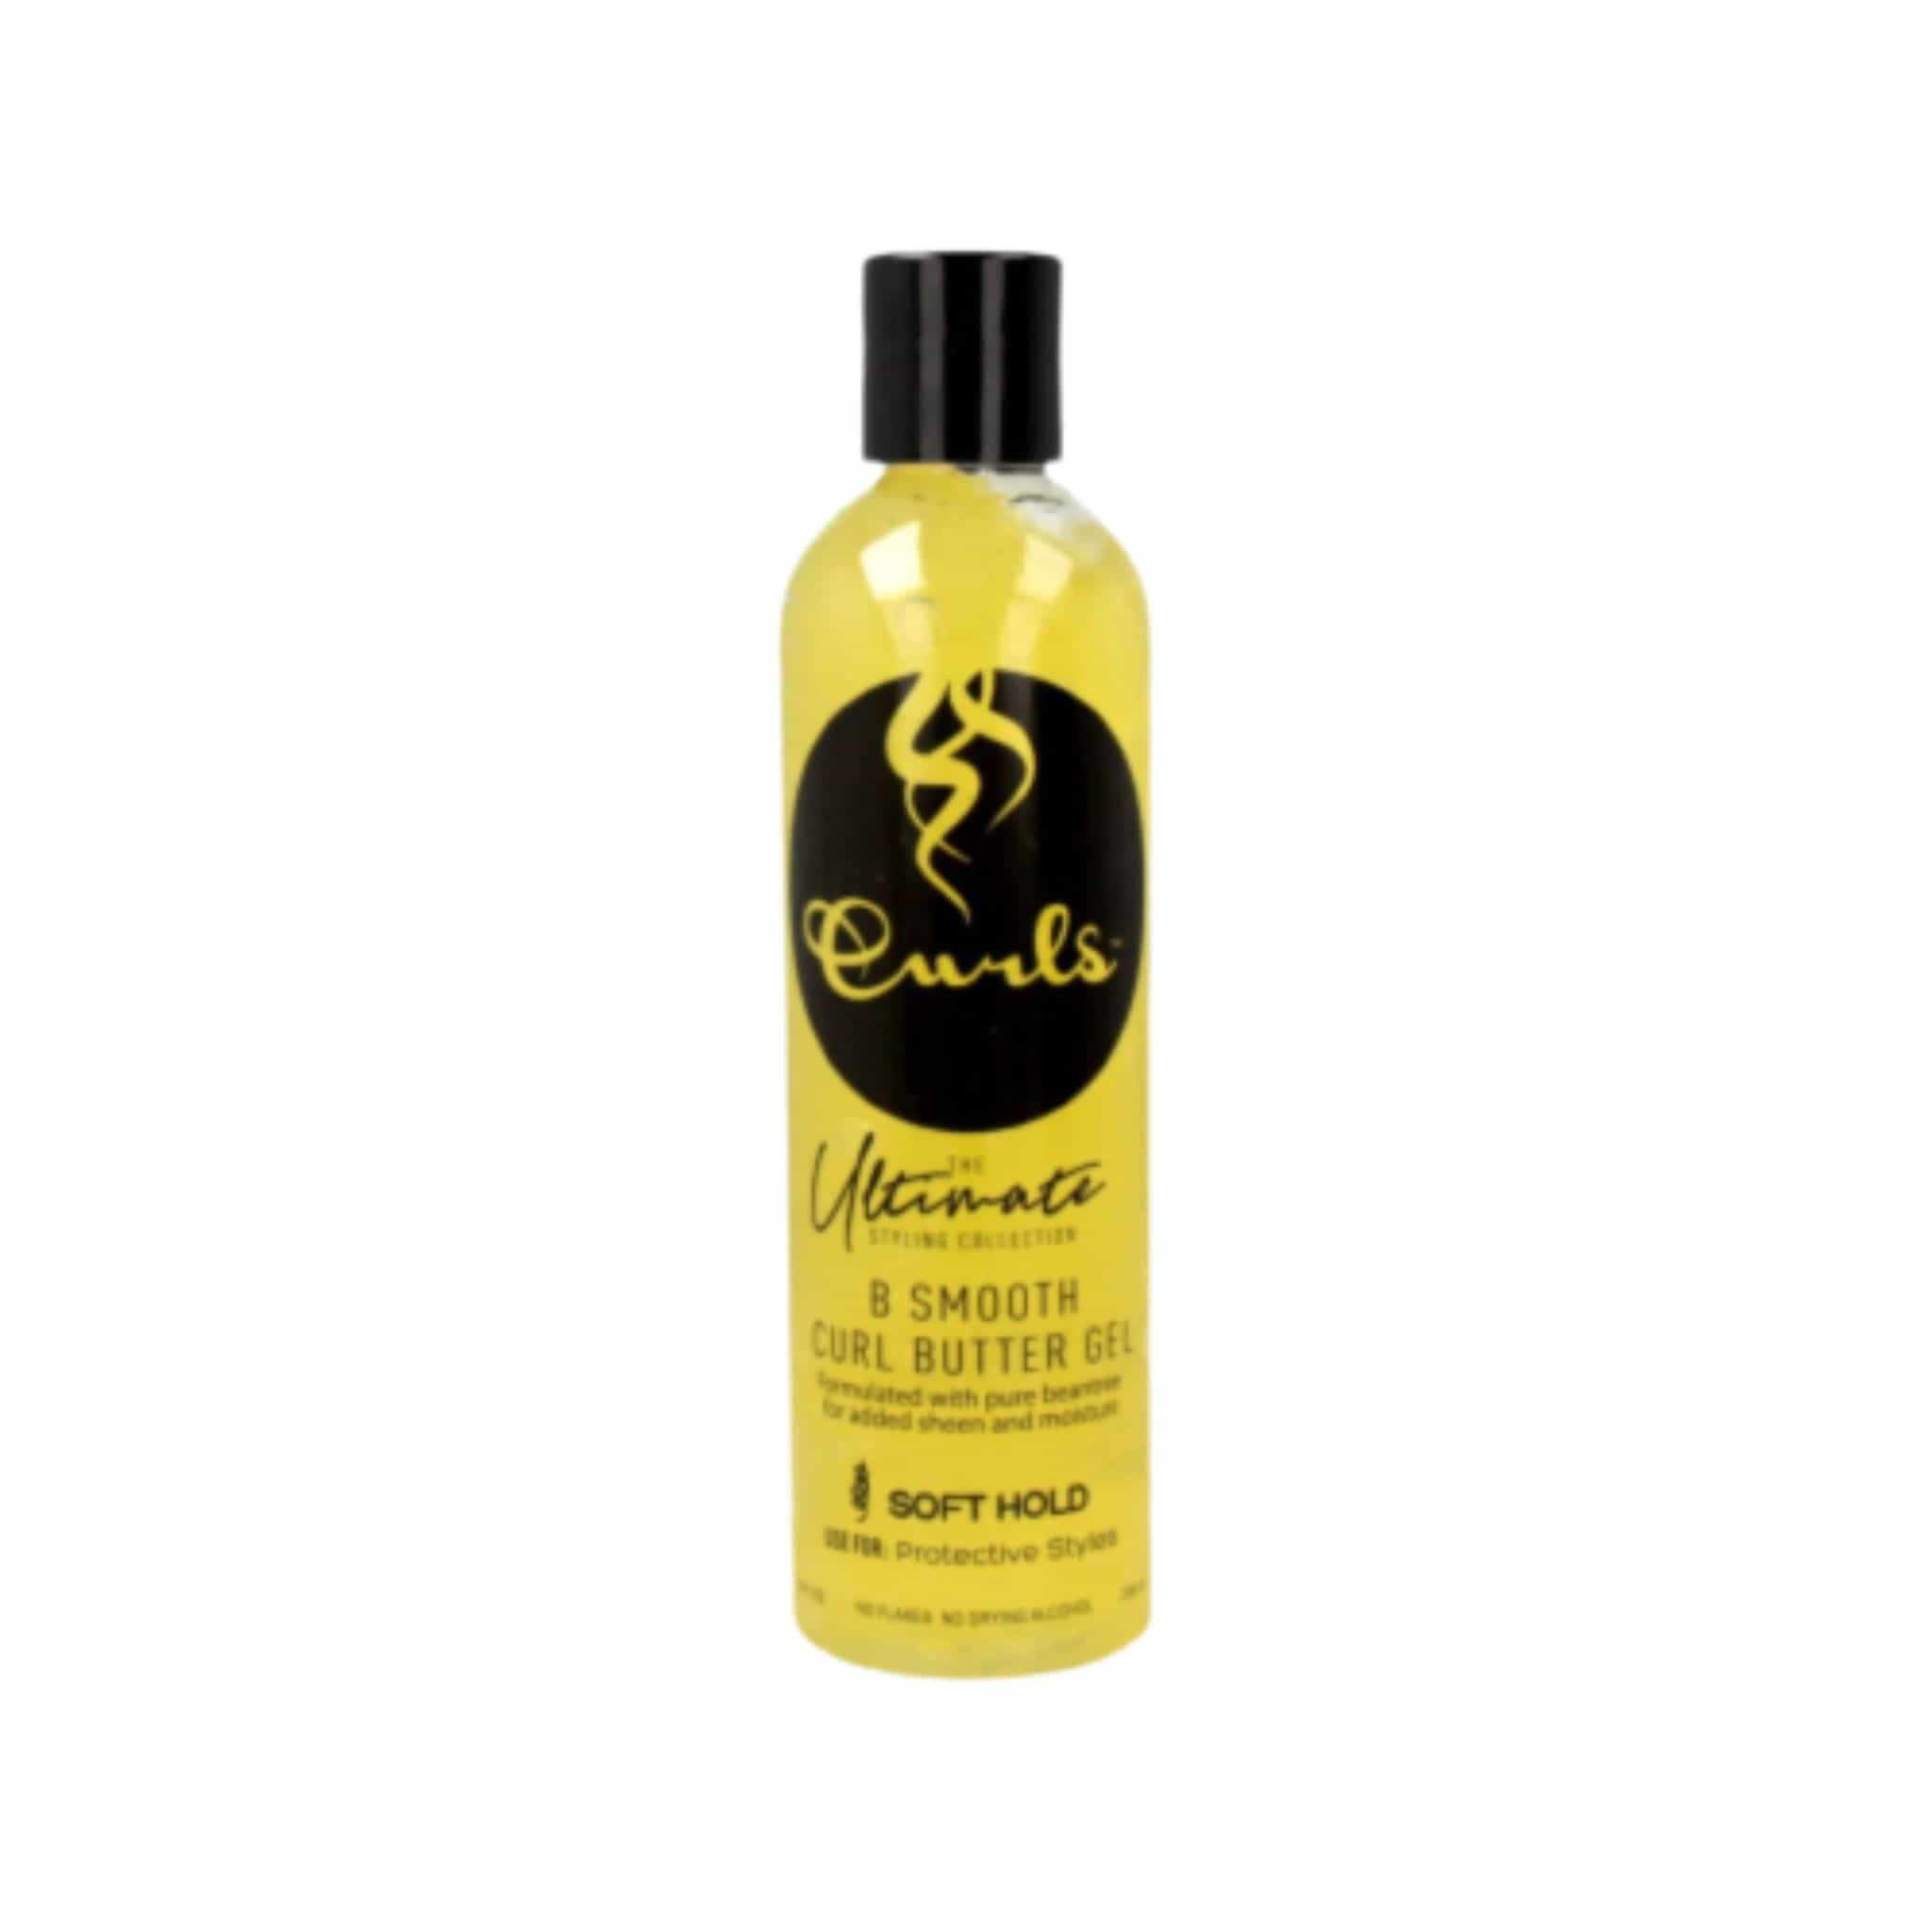 Curls Ultimate B Smooth Curl Butter Gel Soft Hold 236ml